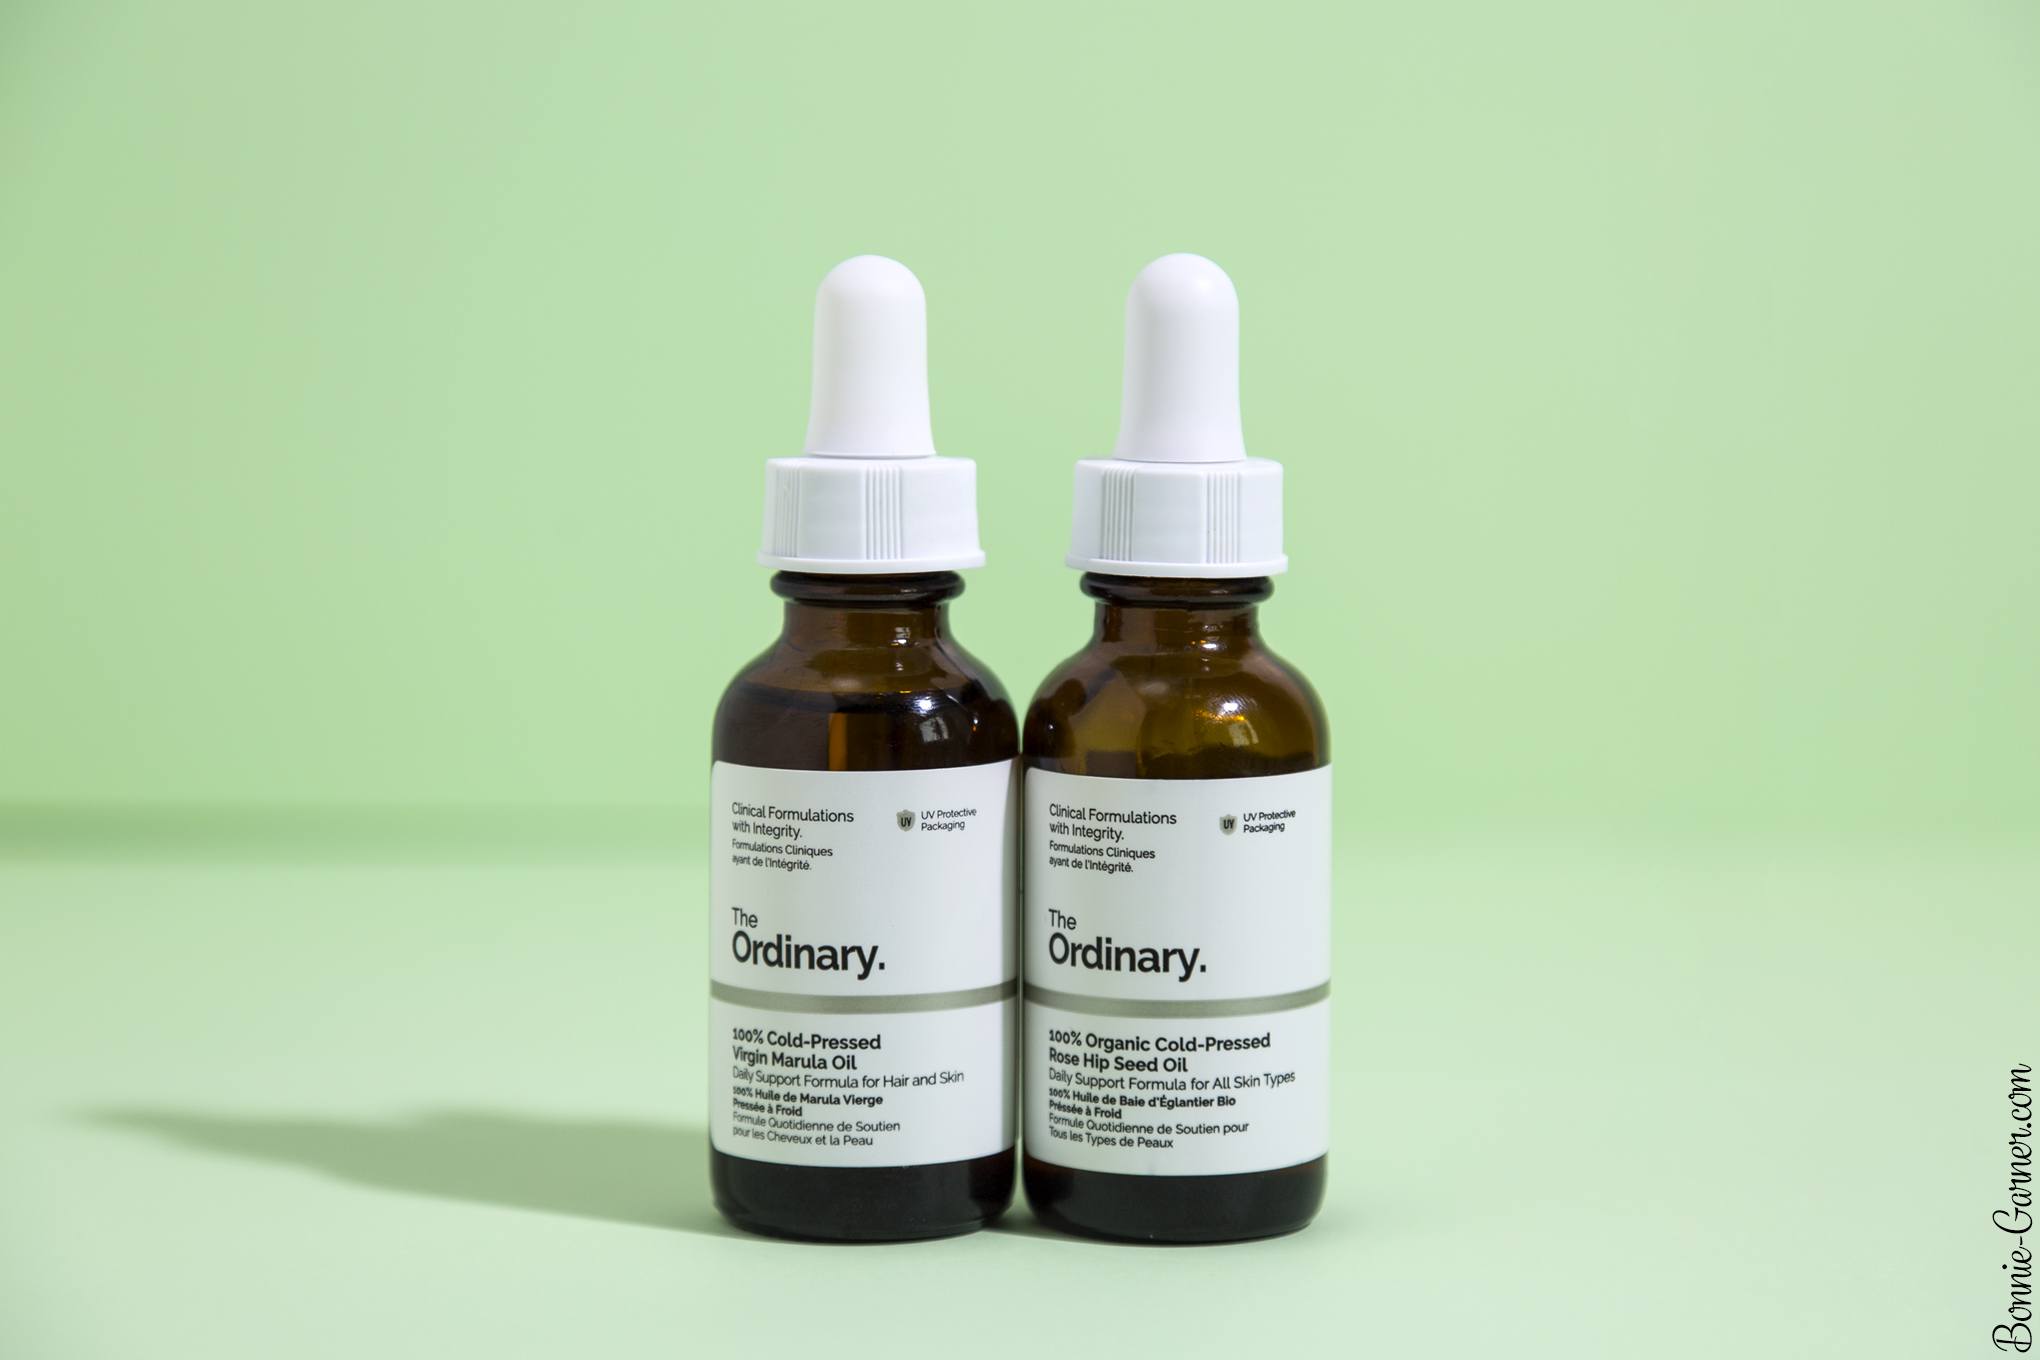 The Ordinary oils: Rose Hip Seed Oil & Marula Oil, my review